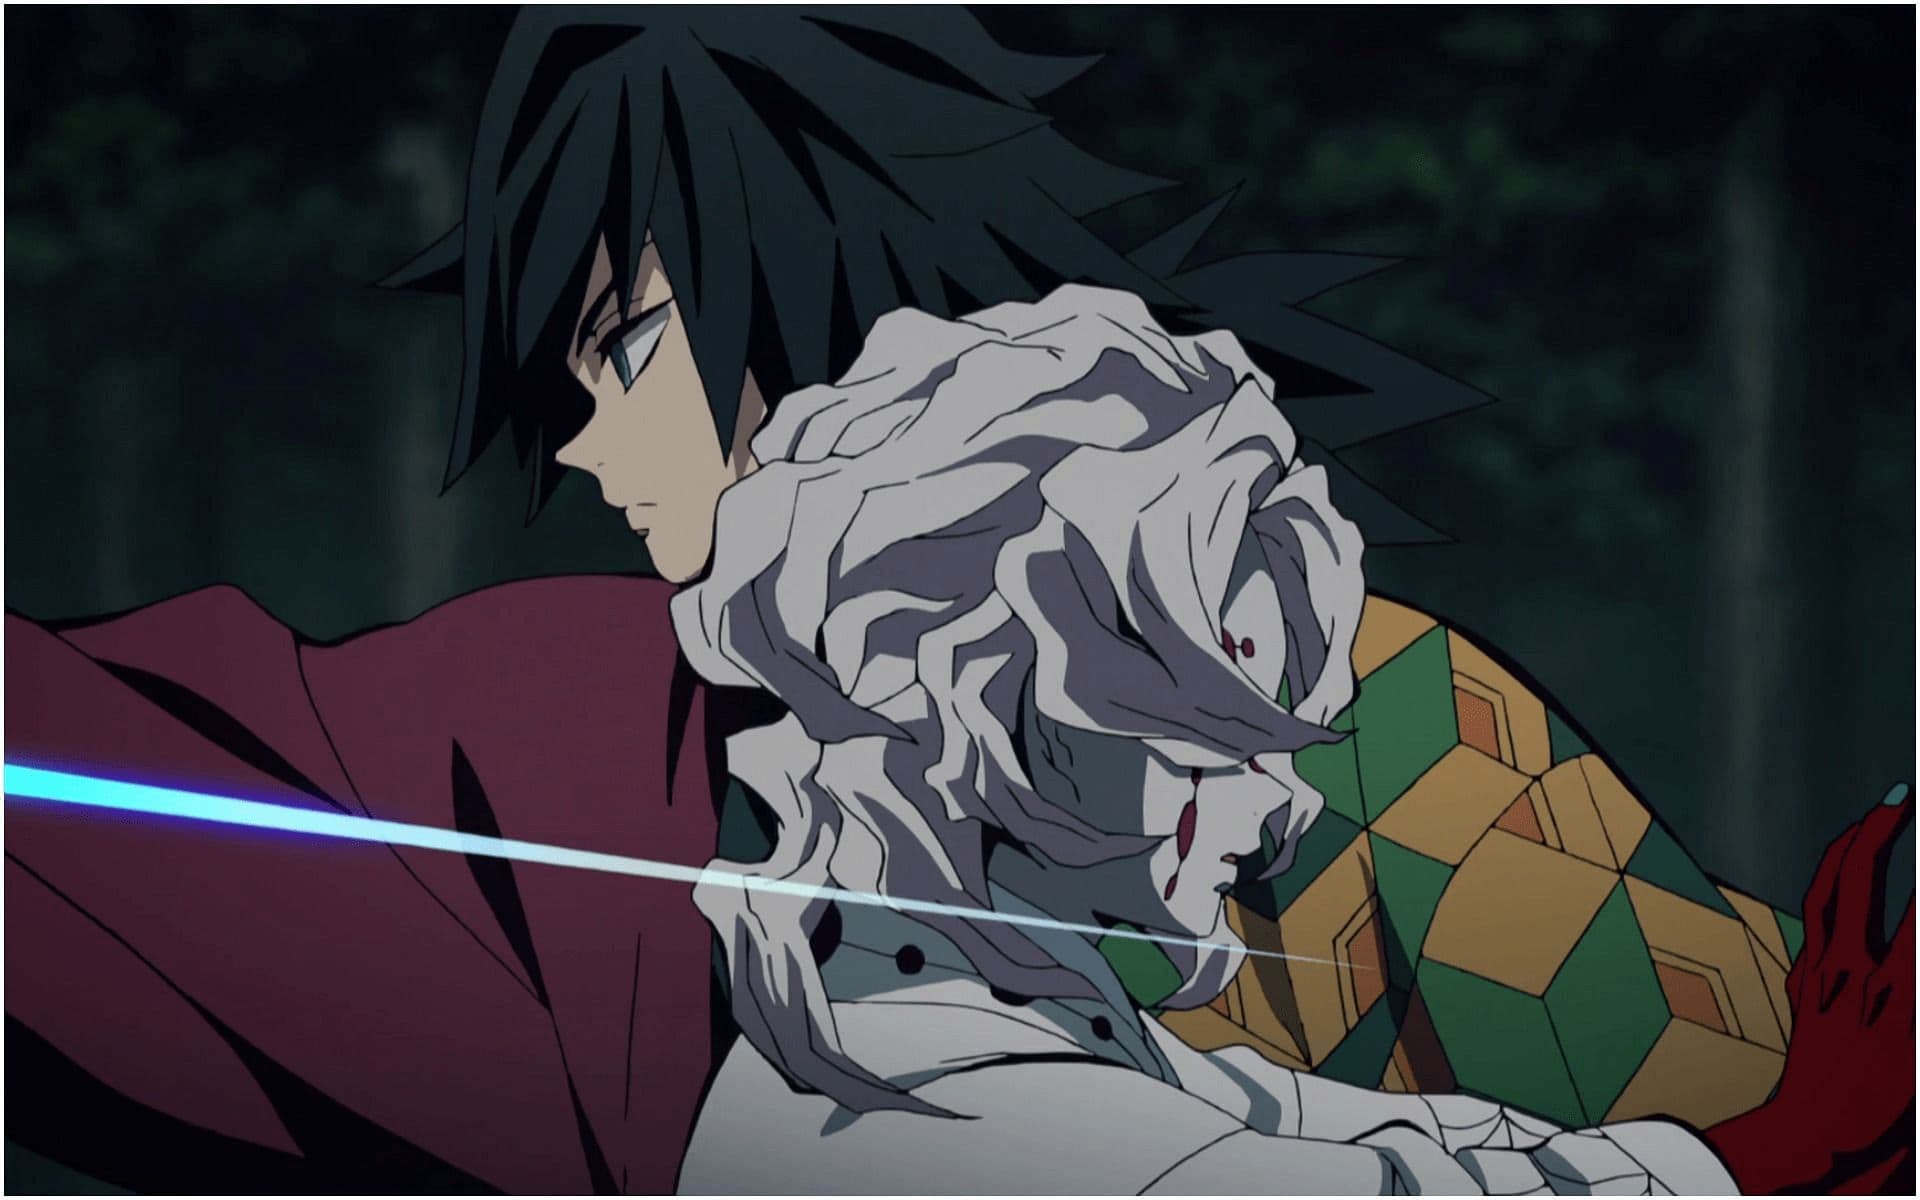 5 Heart-Wrenching Demon Slayer Deaths, In Line with Days Spoilers